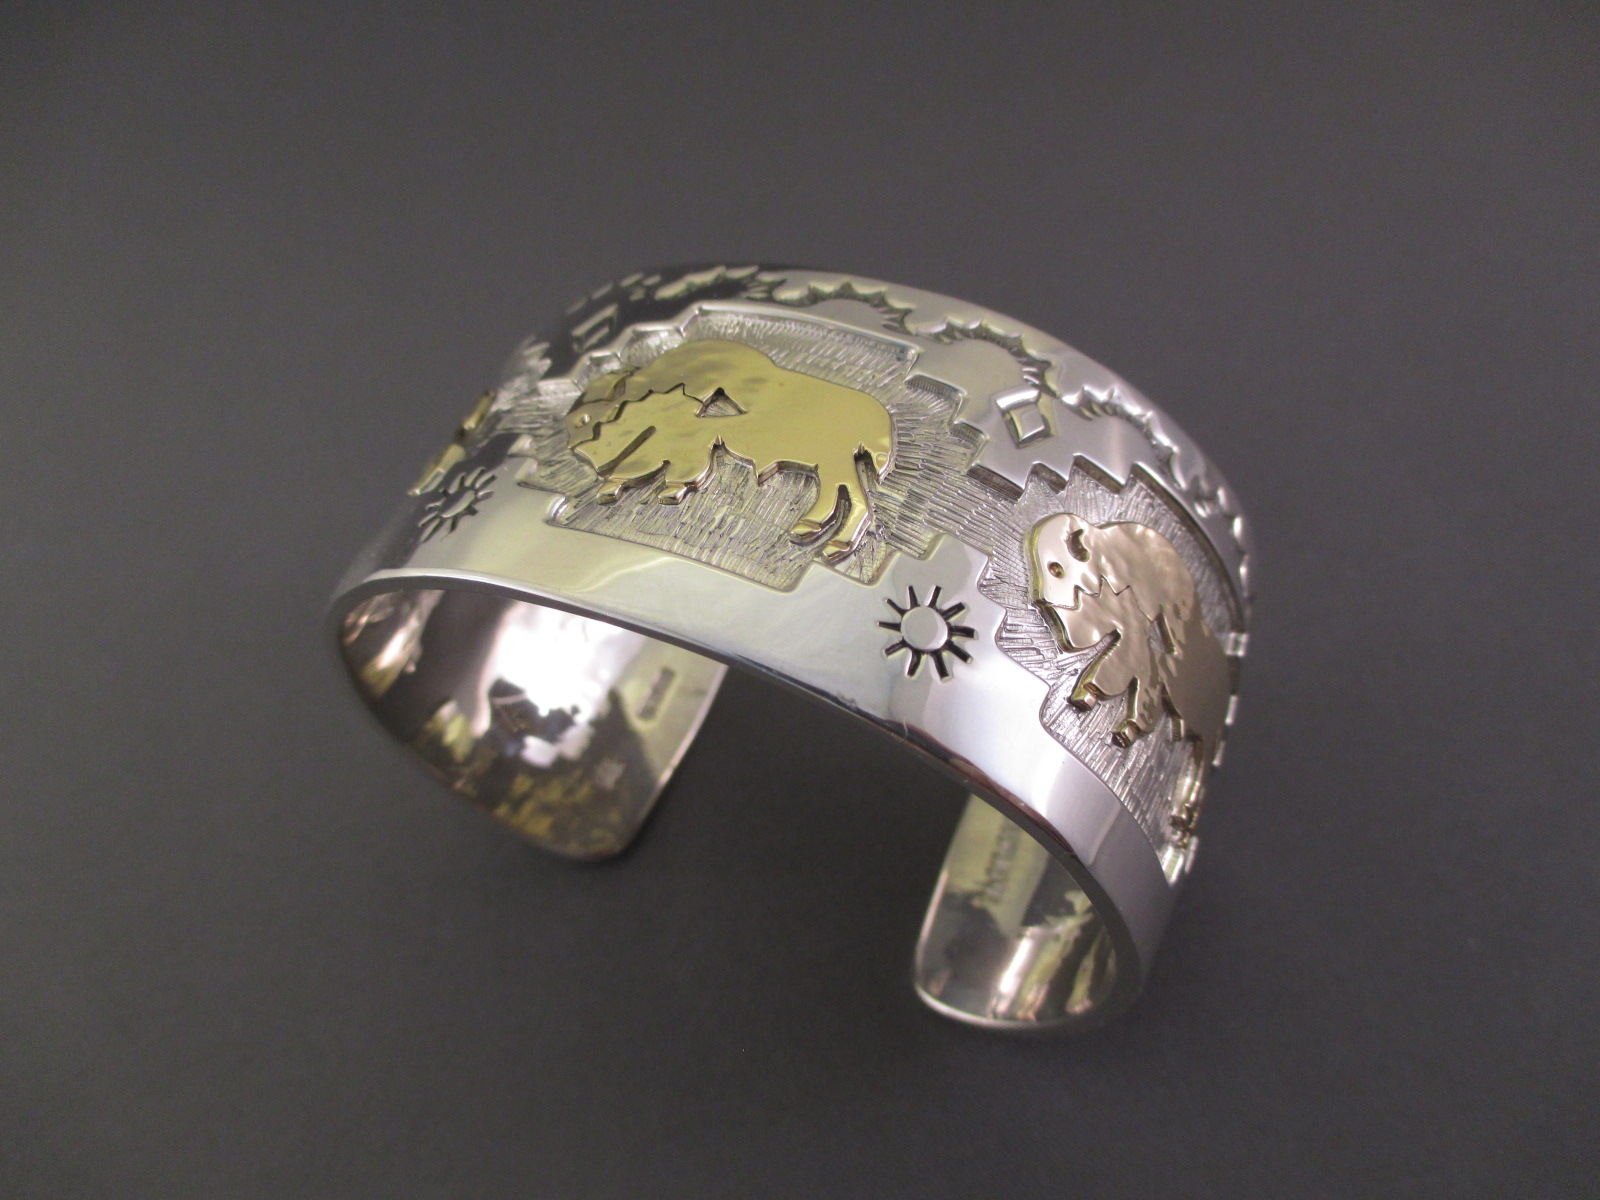 14kt Gold Overlay Cuff Bracelet featuring Bison - Native American Jewelry